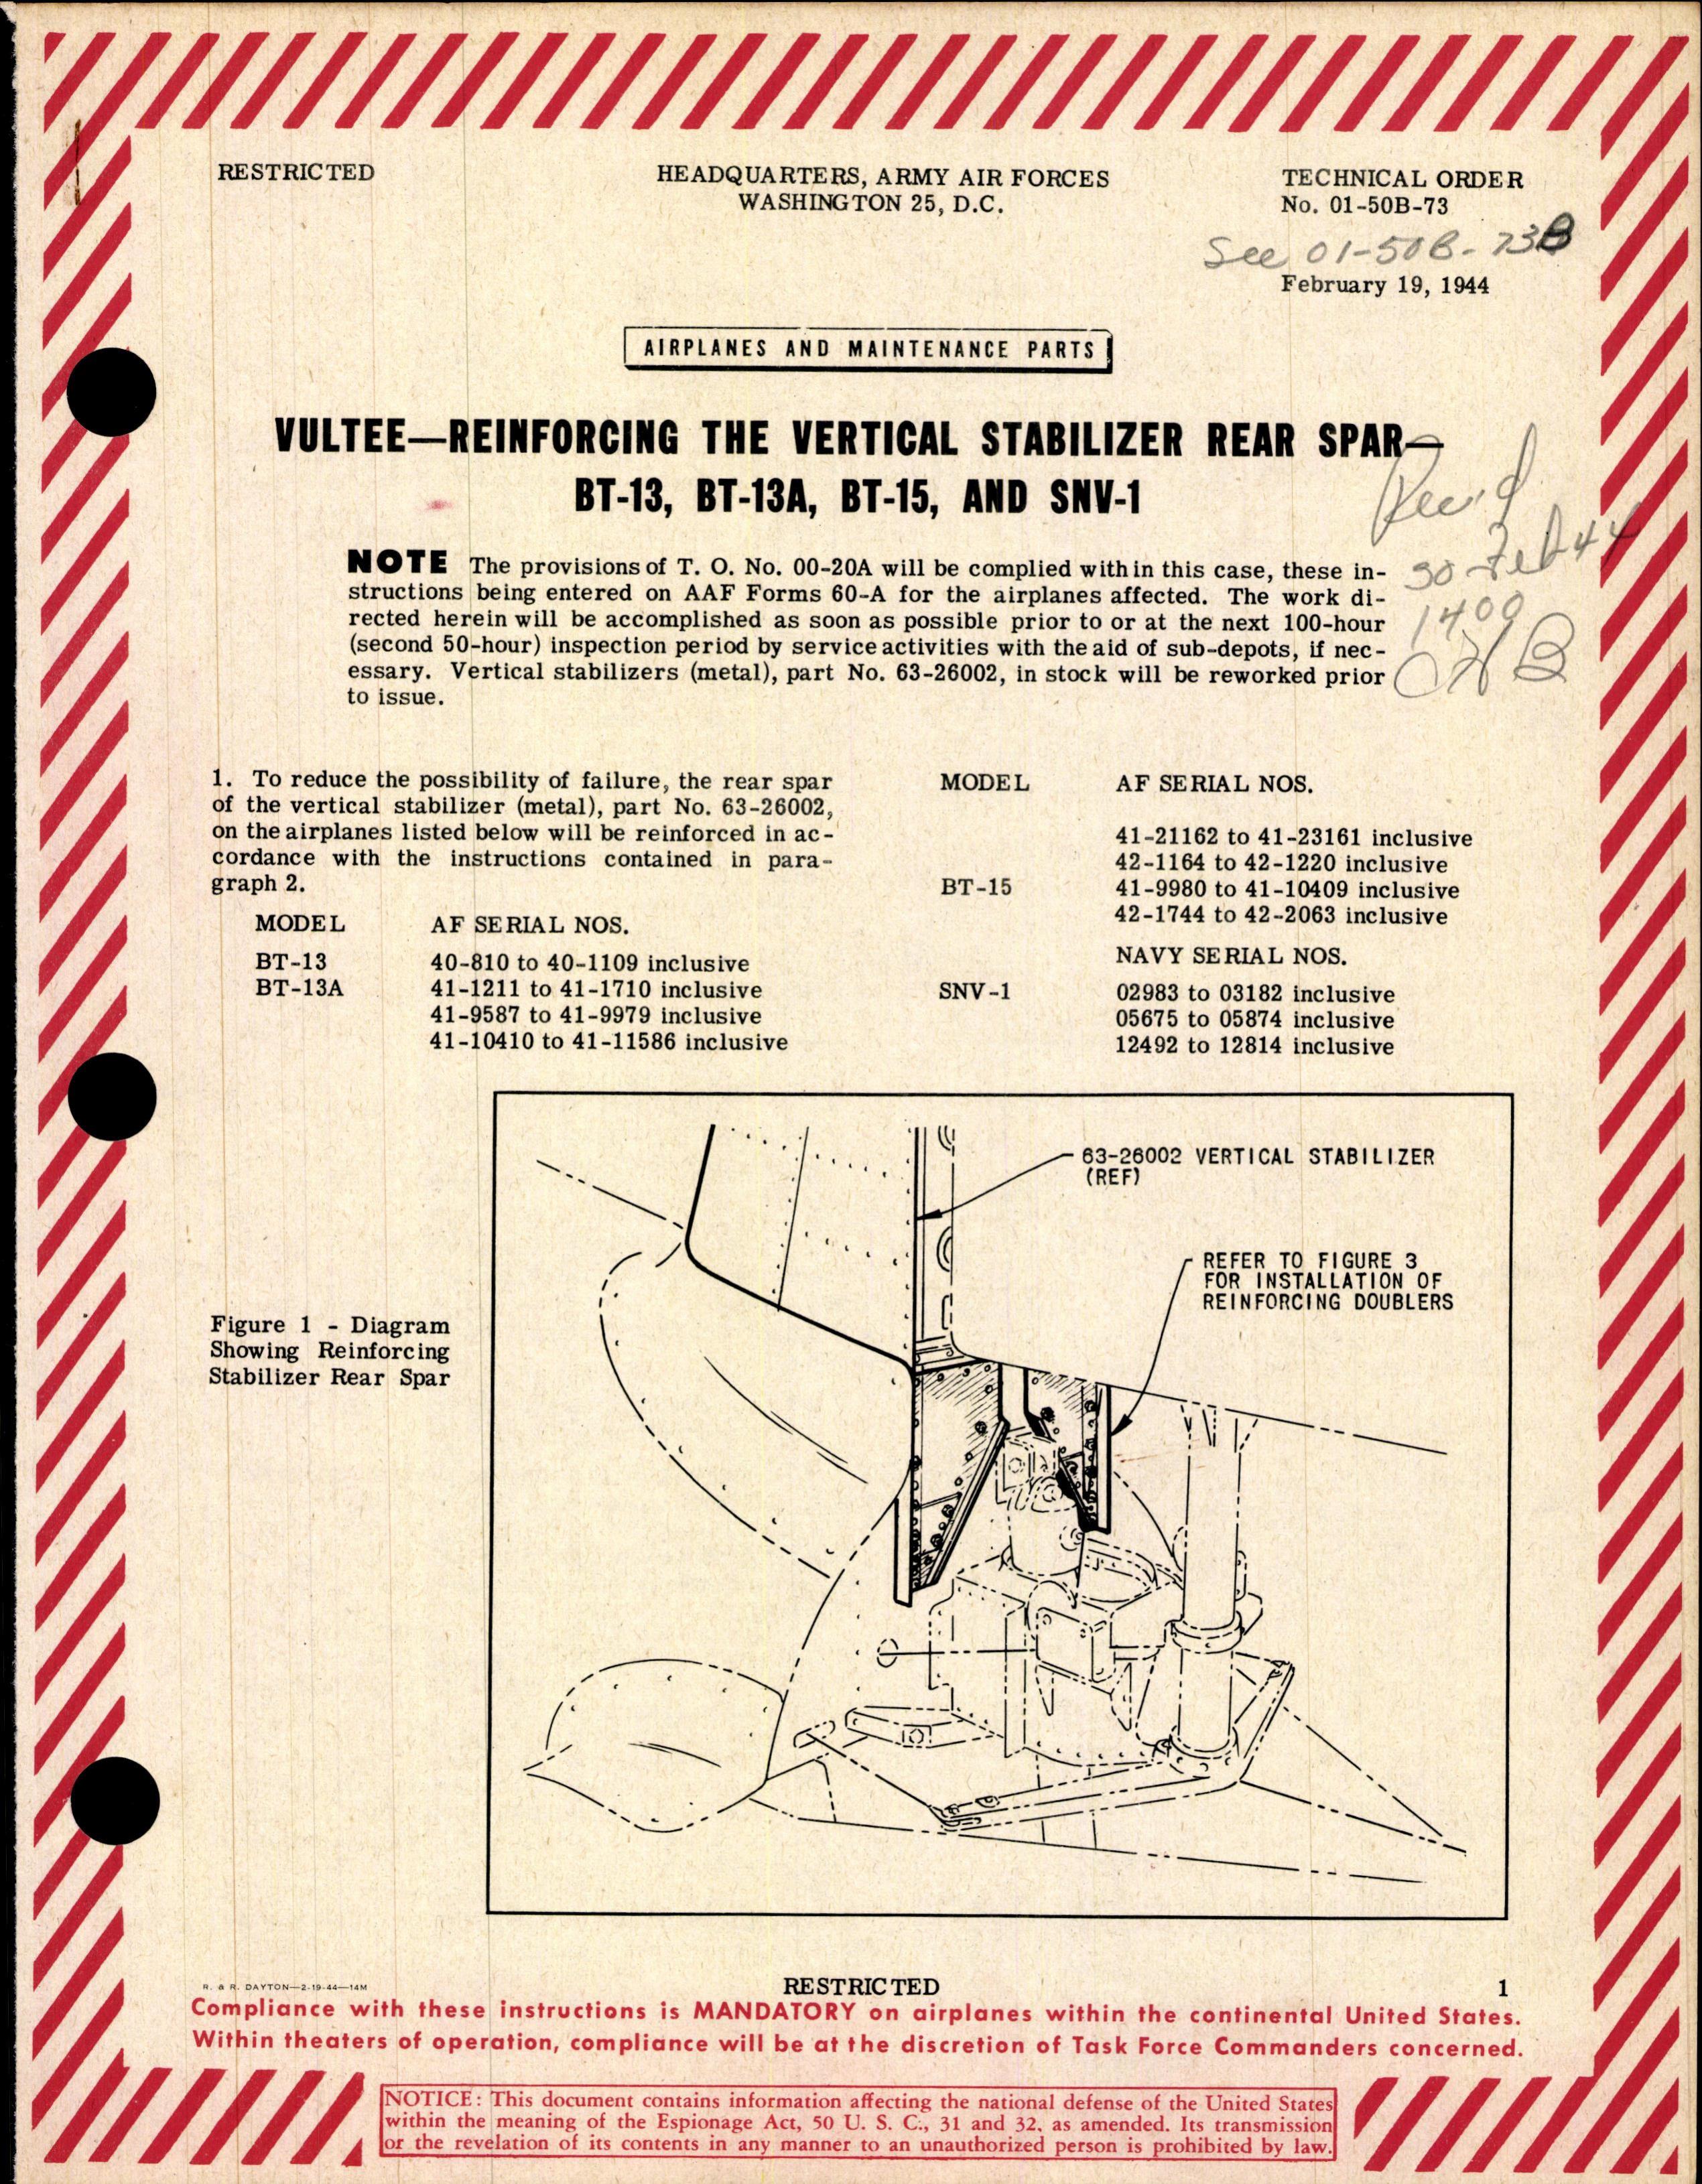 Sample page 1 from AirCorps Library document: Reinforcing the Vertical Stabilizer Rear Spar - BT-13, BT-13A, BT-15, and SNV-1